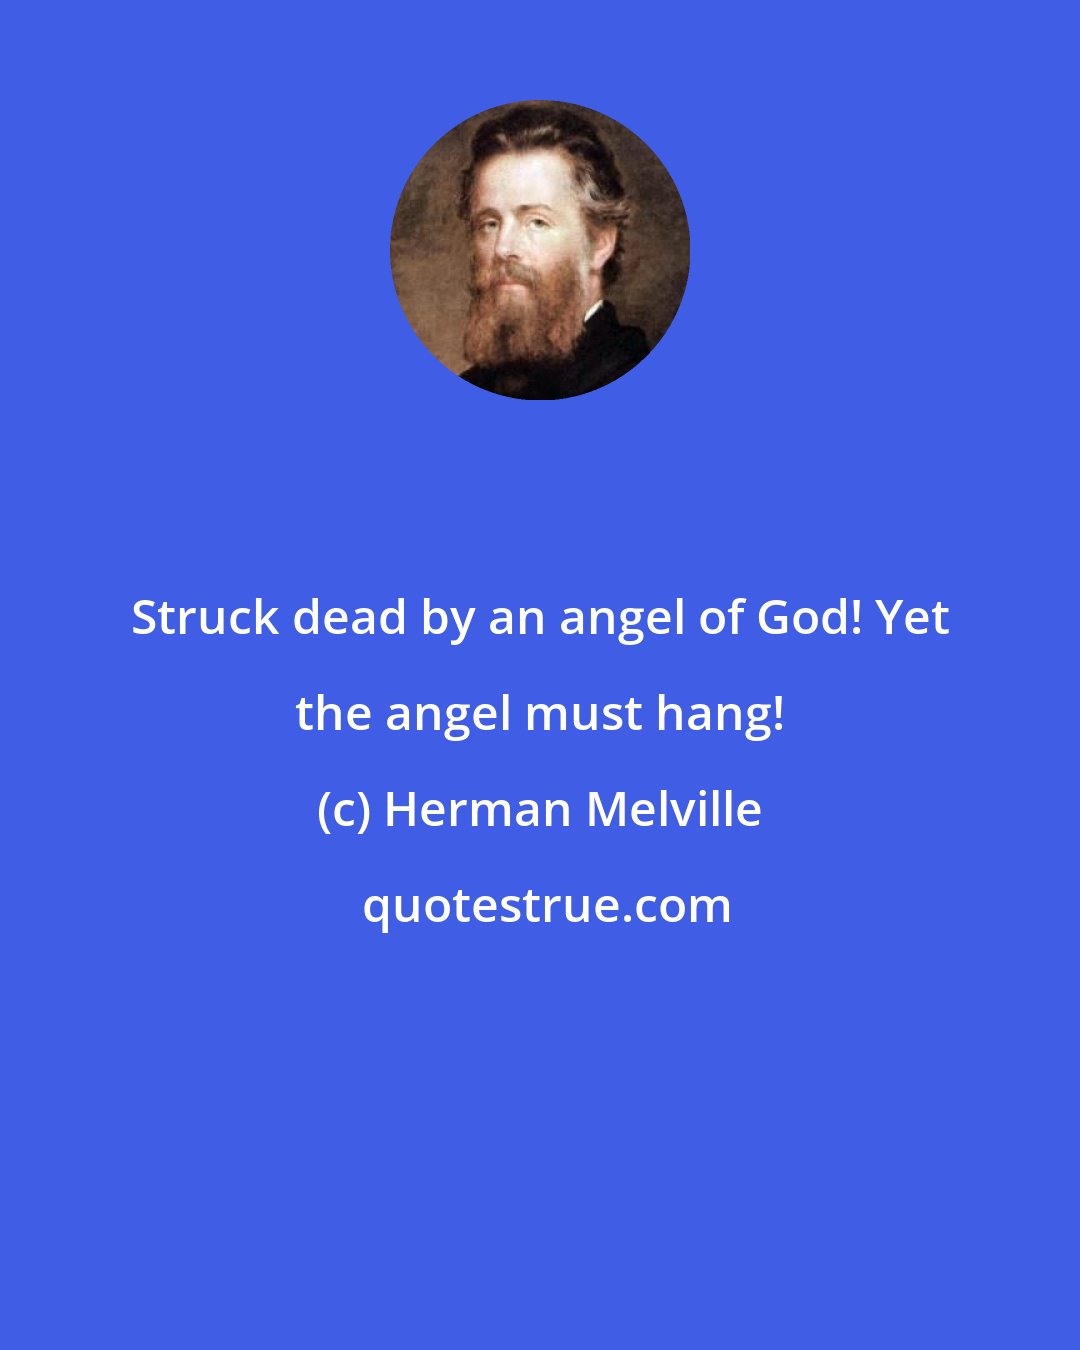 Herman Melville: Struck dead by an angel of God! Yet the angel must hang!